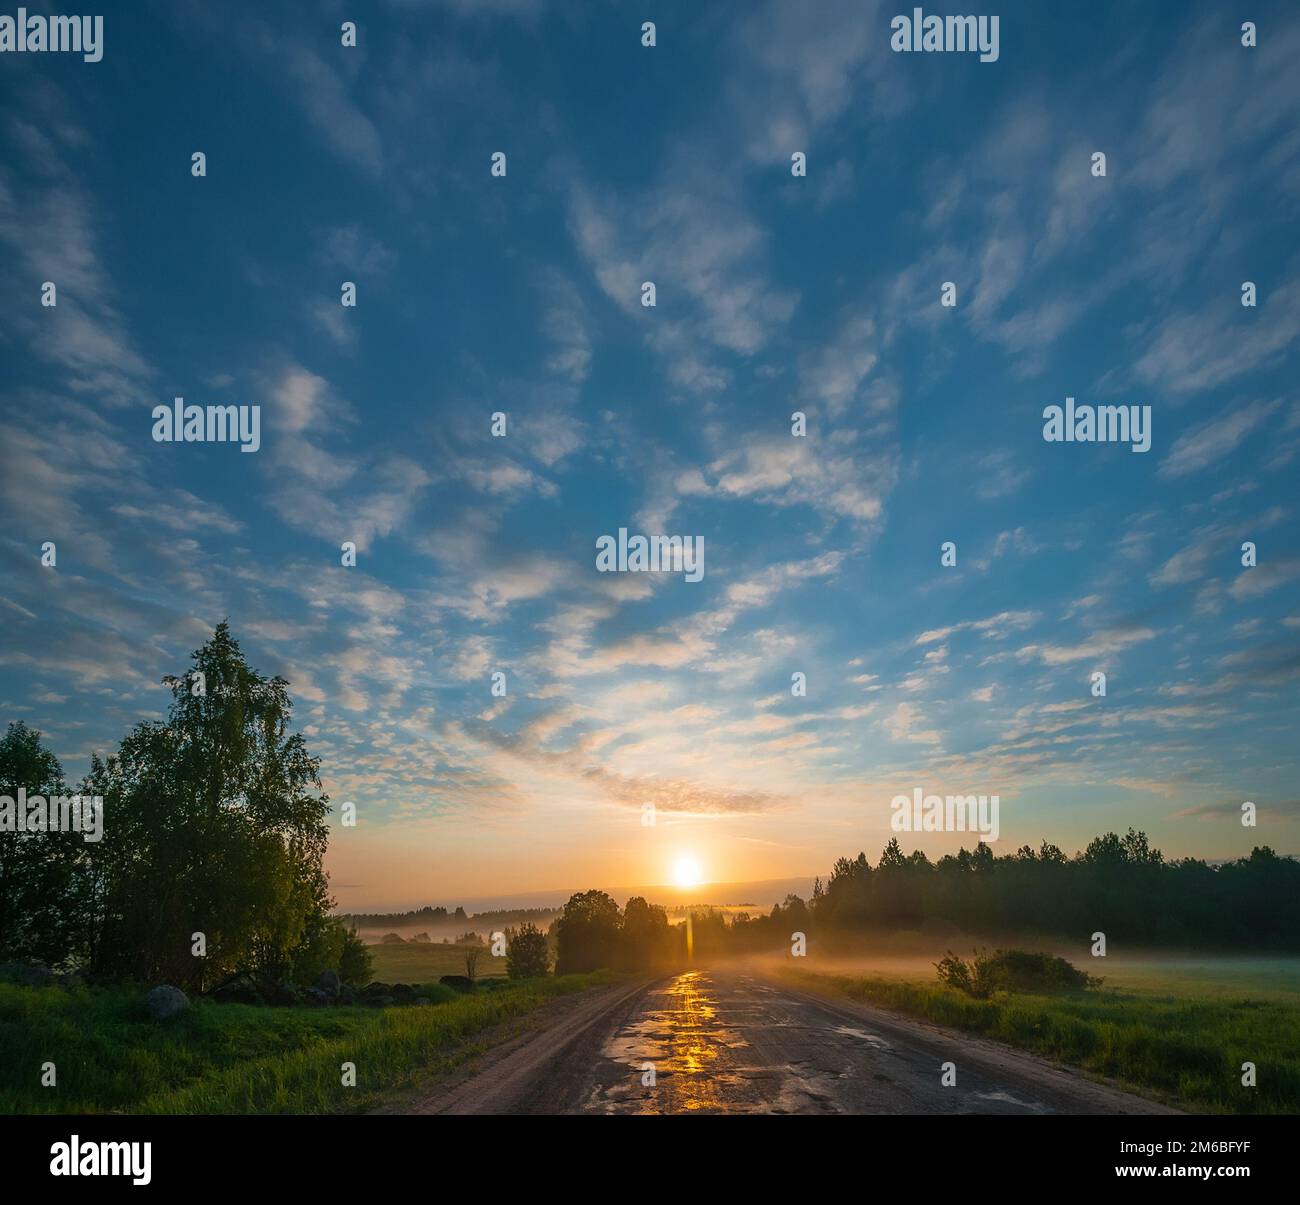 Morning landscape with country road passing through field and pastures at sunrise. Pskov region, Russia. Stock Photo